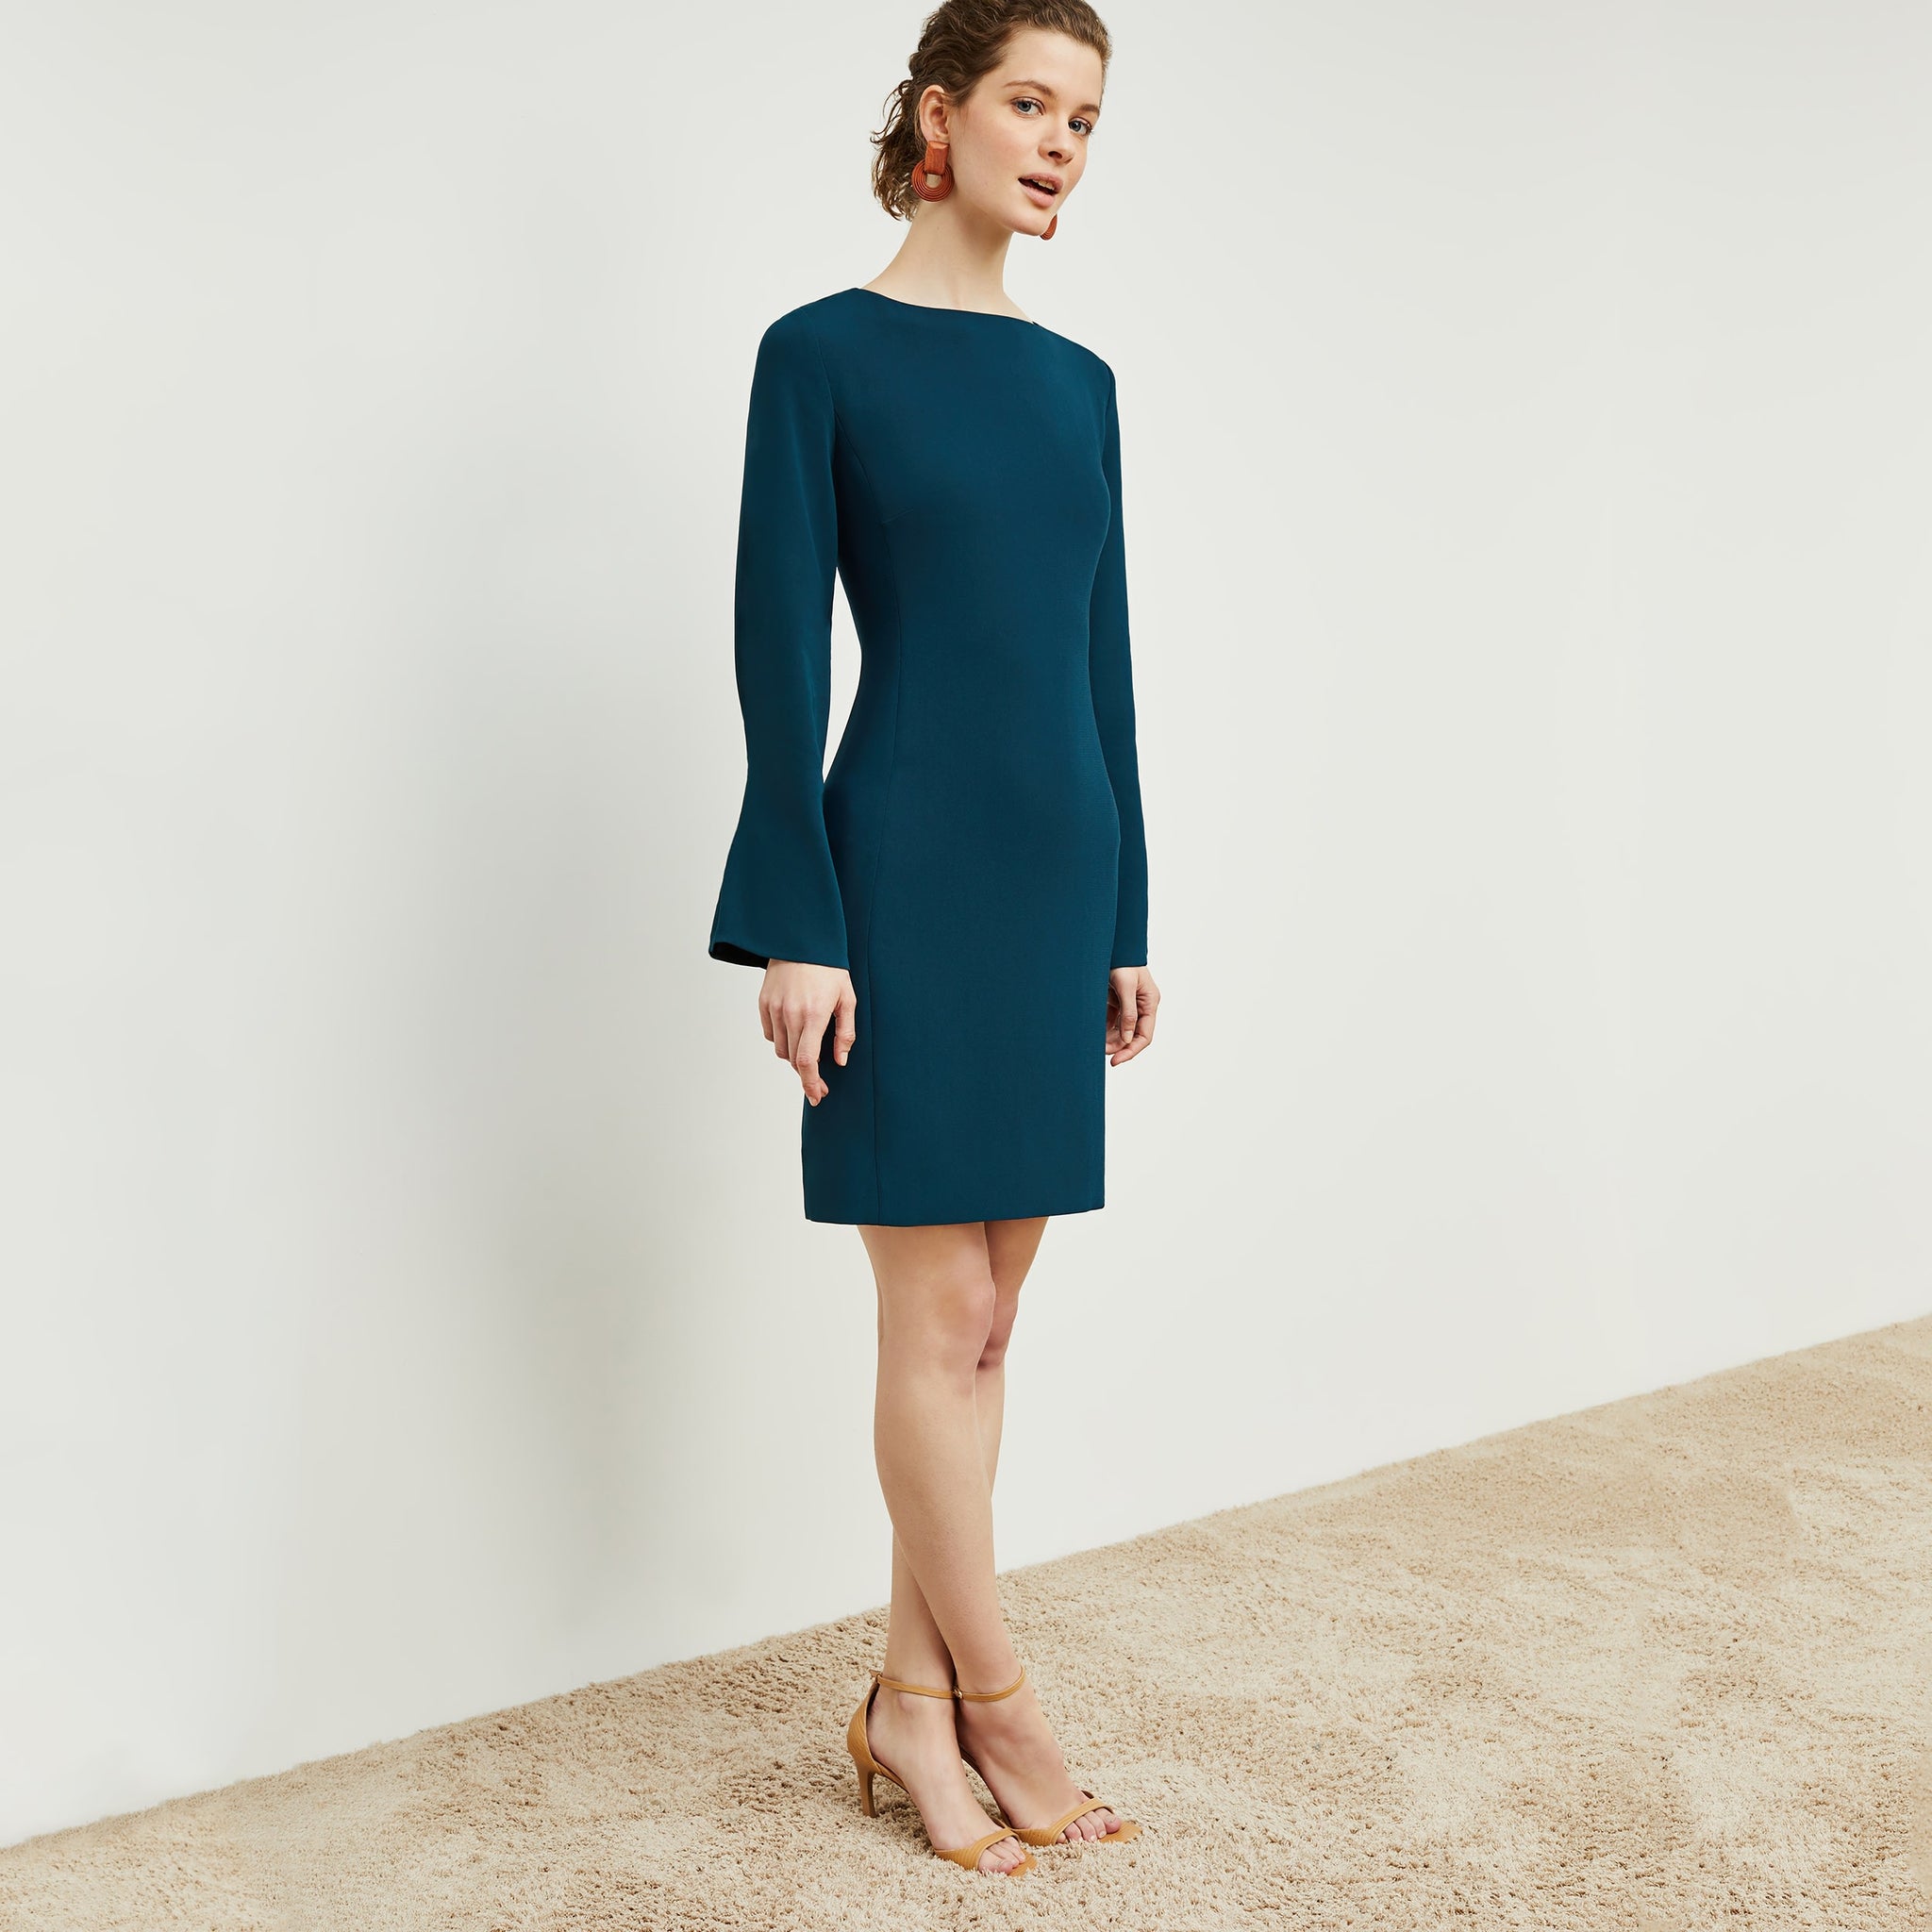 Side image of a woman standing wearing the Regina Dress in Rainforest